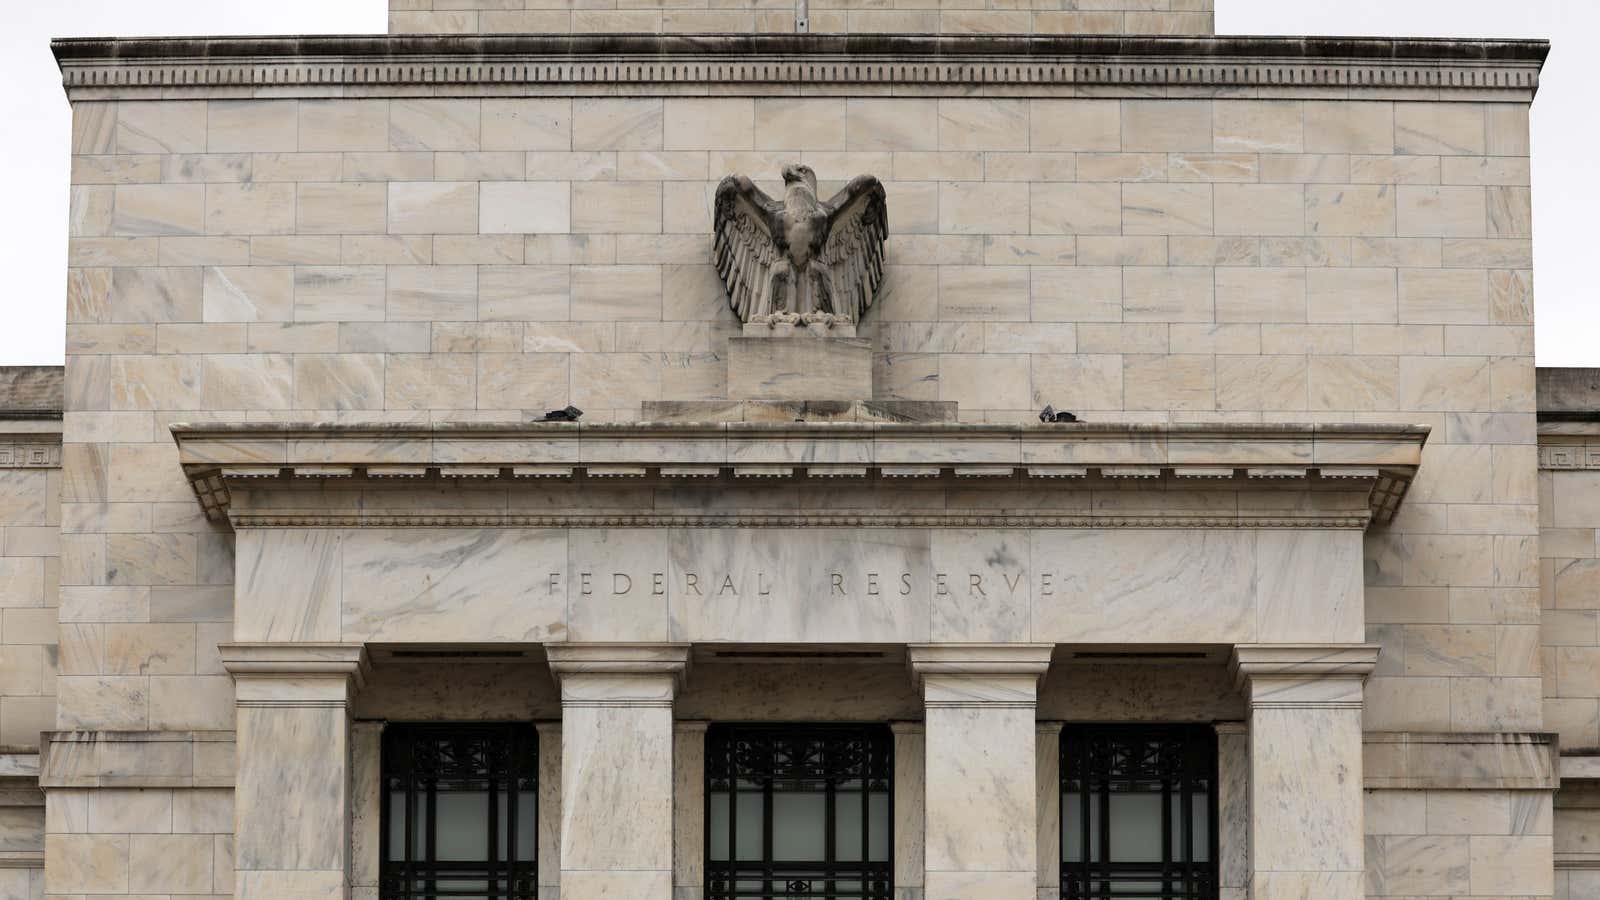 The Federal Reserve took drastic measures last week to keep the private banking sector stable.